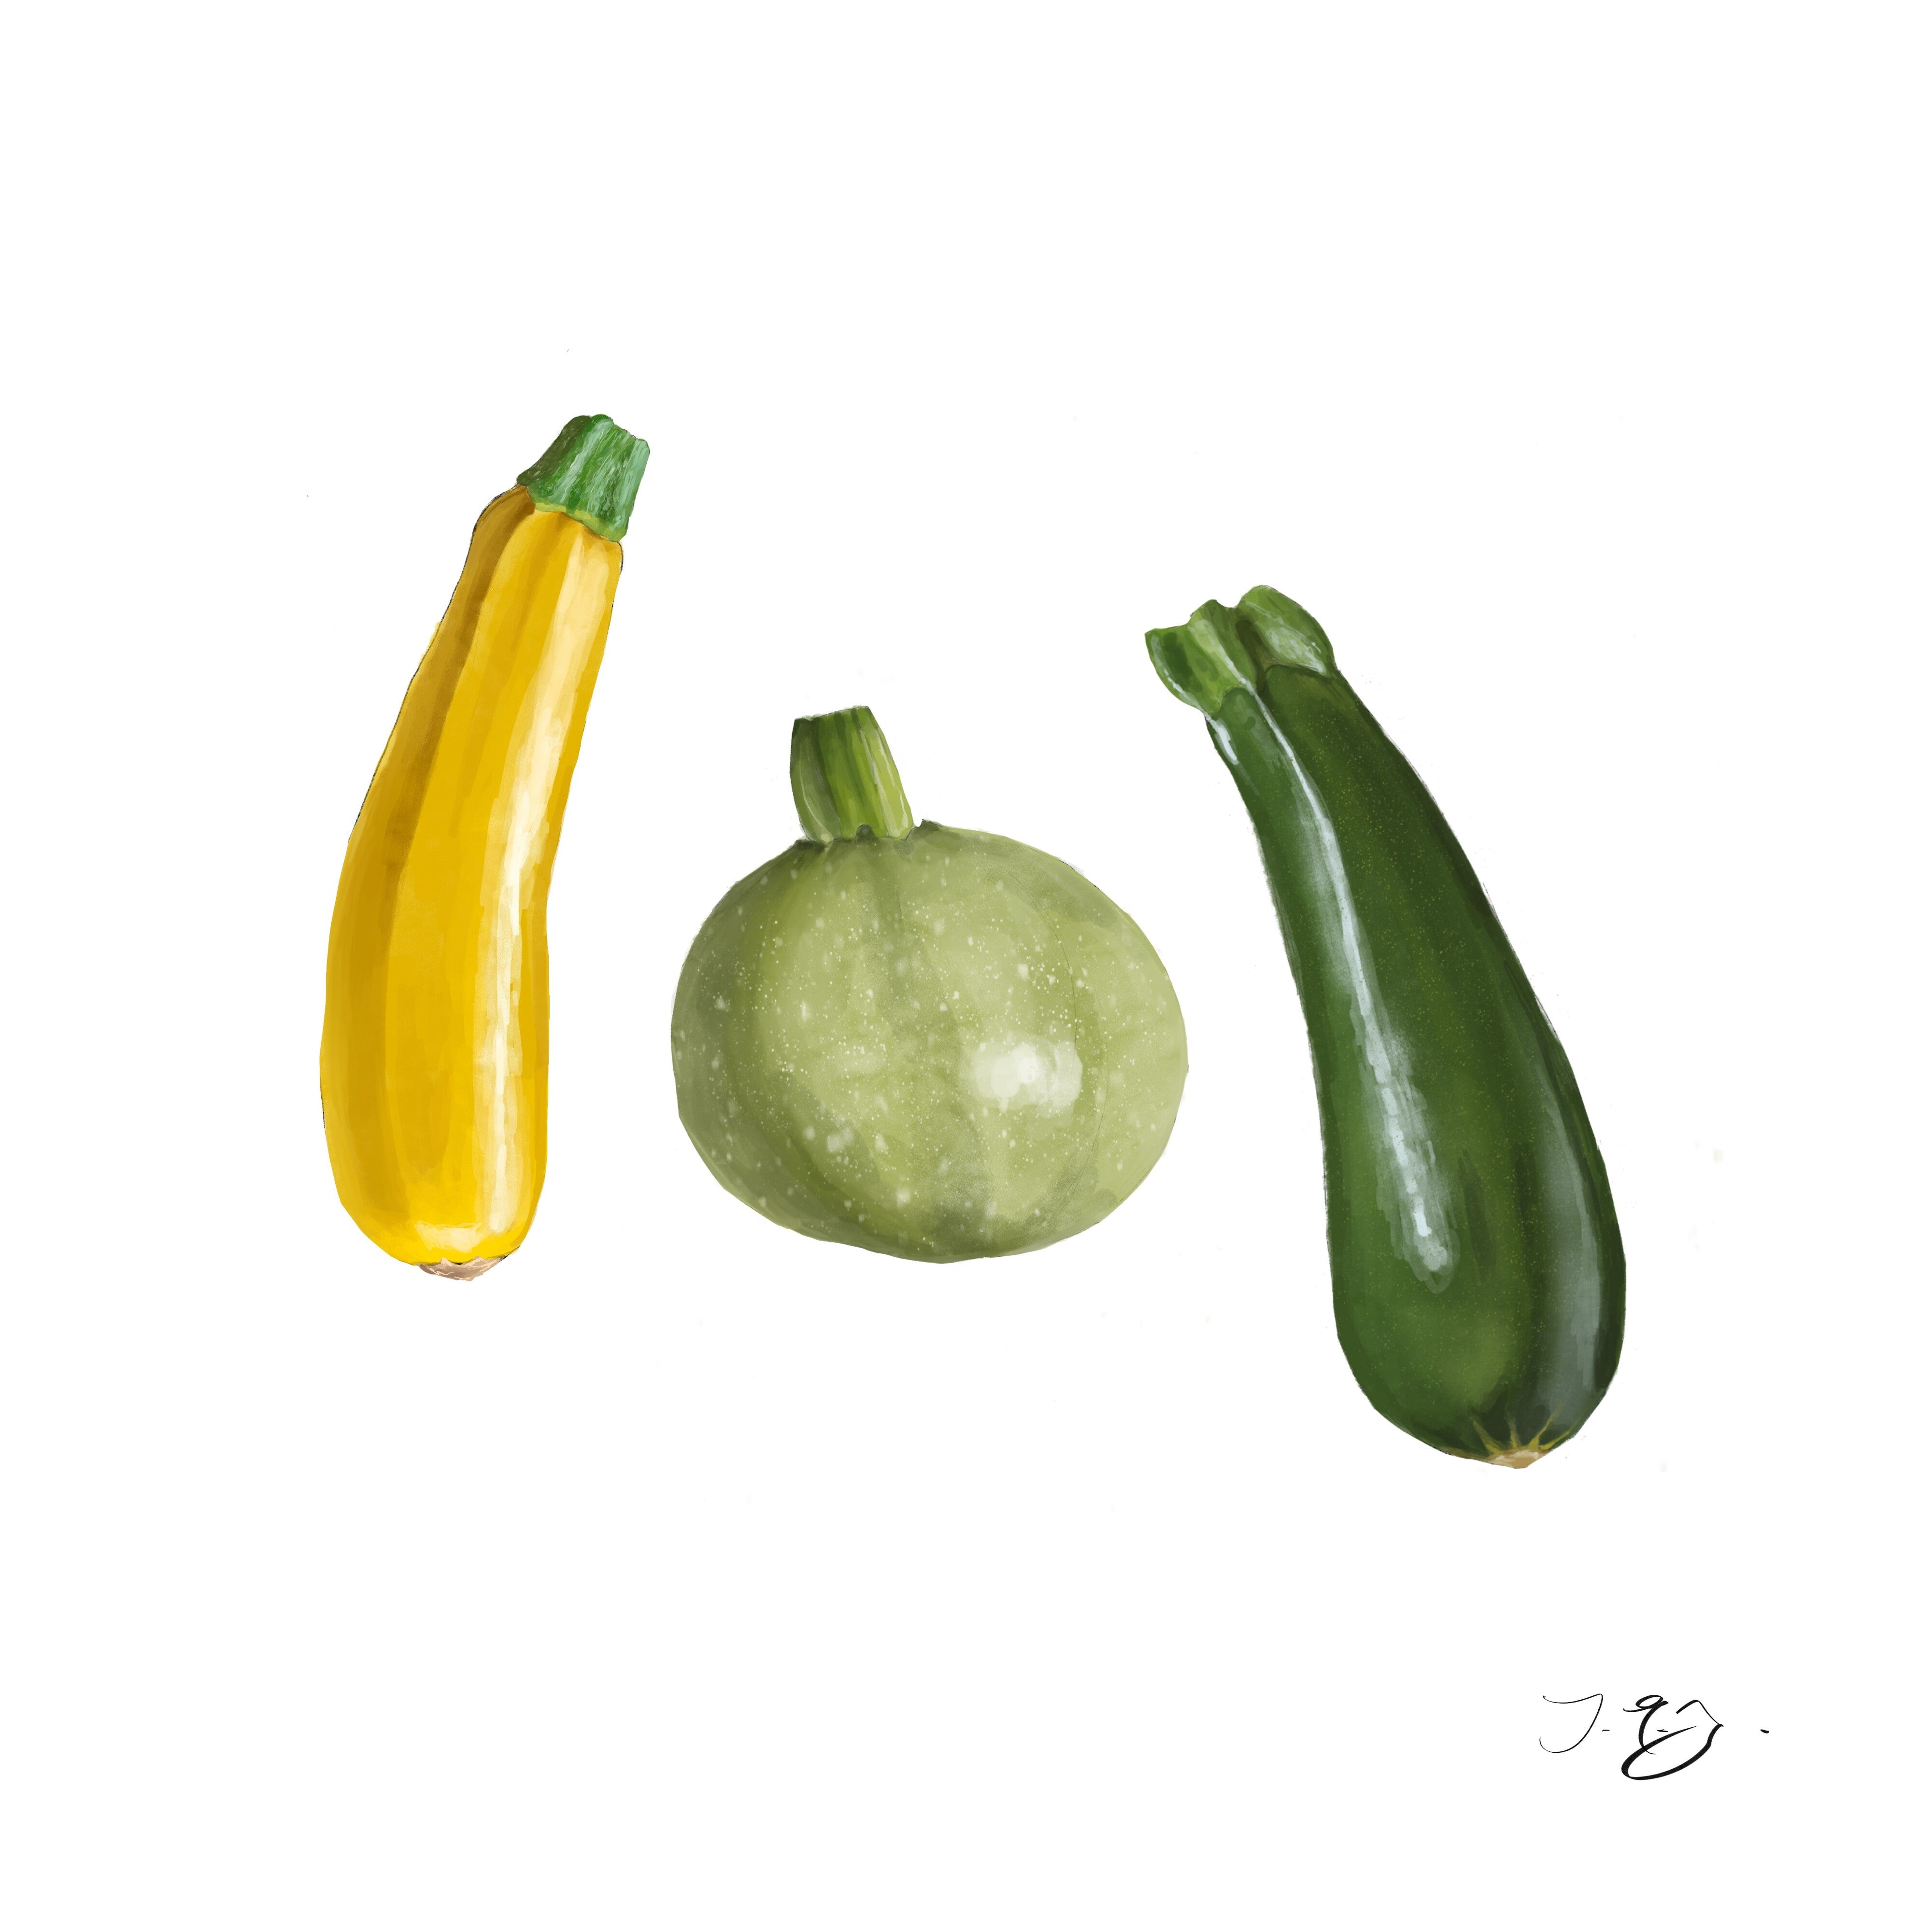 Courgette (Mixed Varieties) - Each